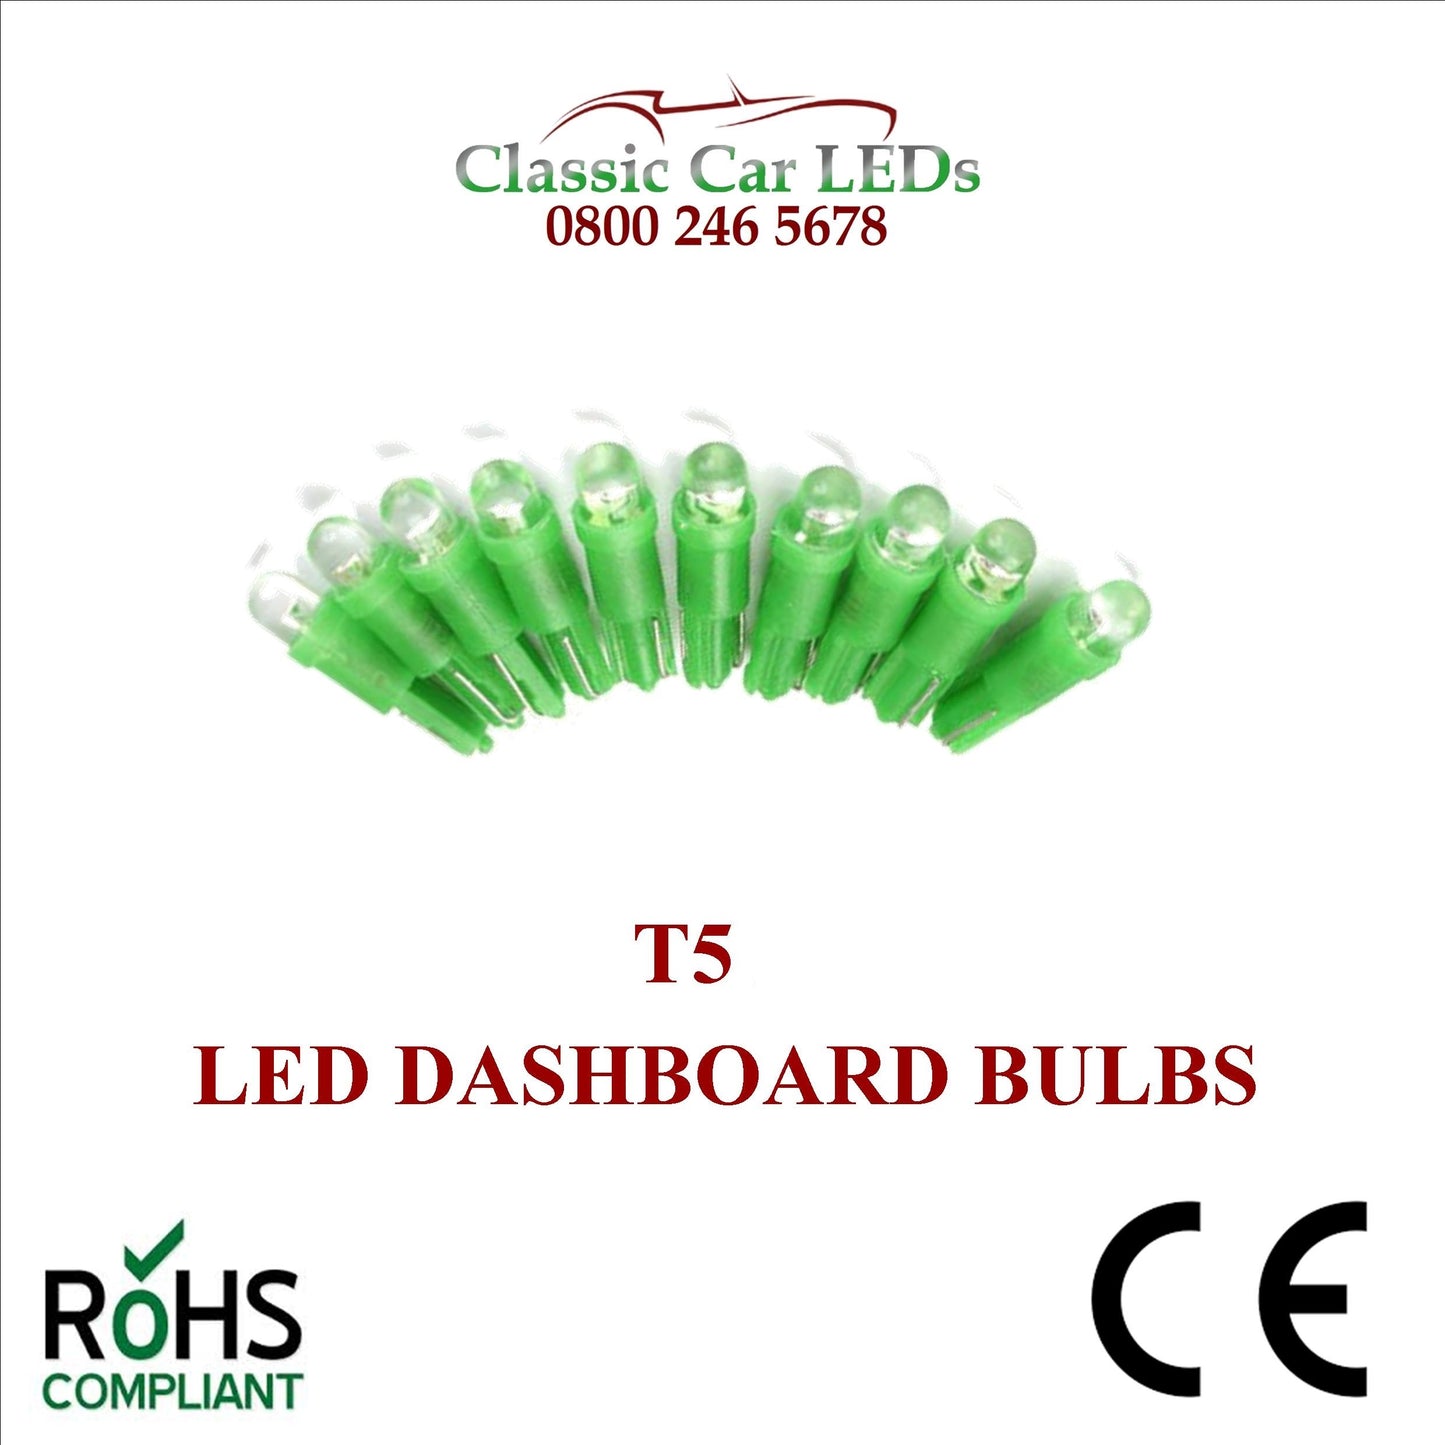 24 VOLT 508 T5 LED DASHBOARD UPGRADE BULBS VARIOUS COLOURS 5MM CAPLESS